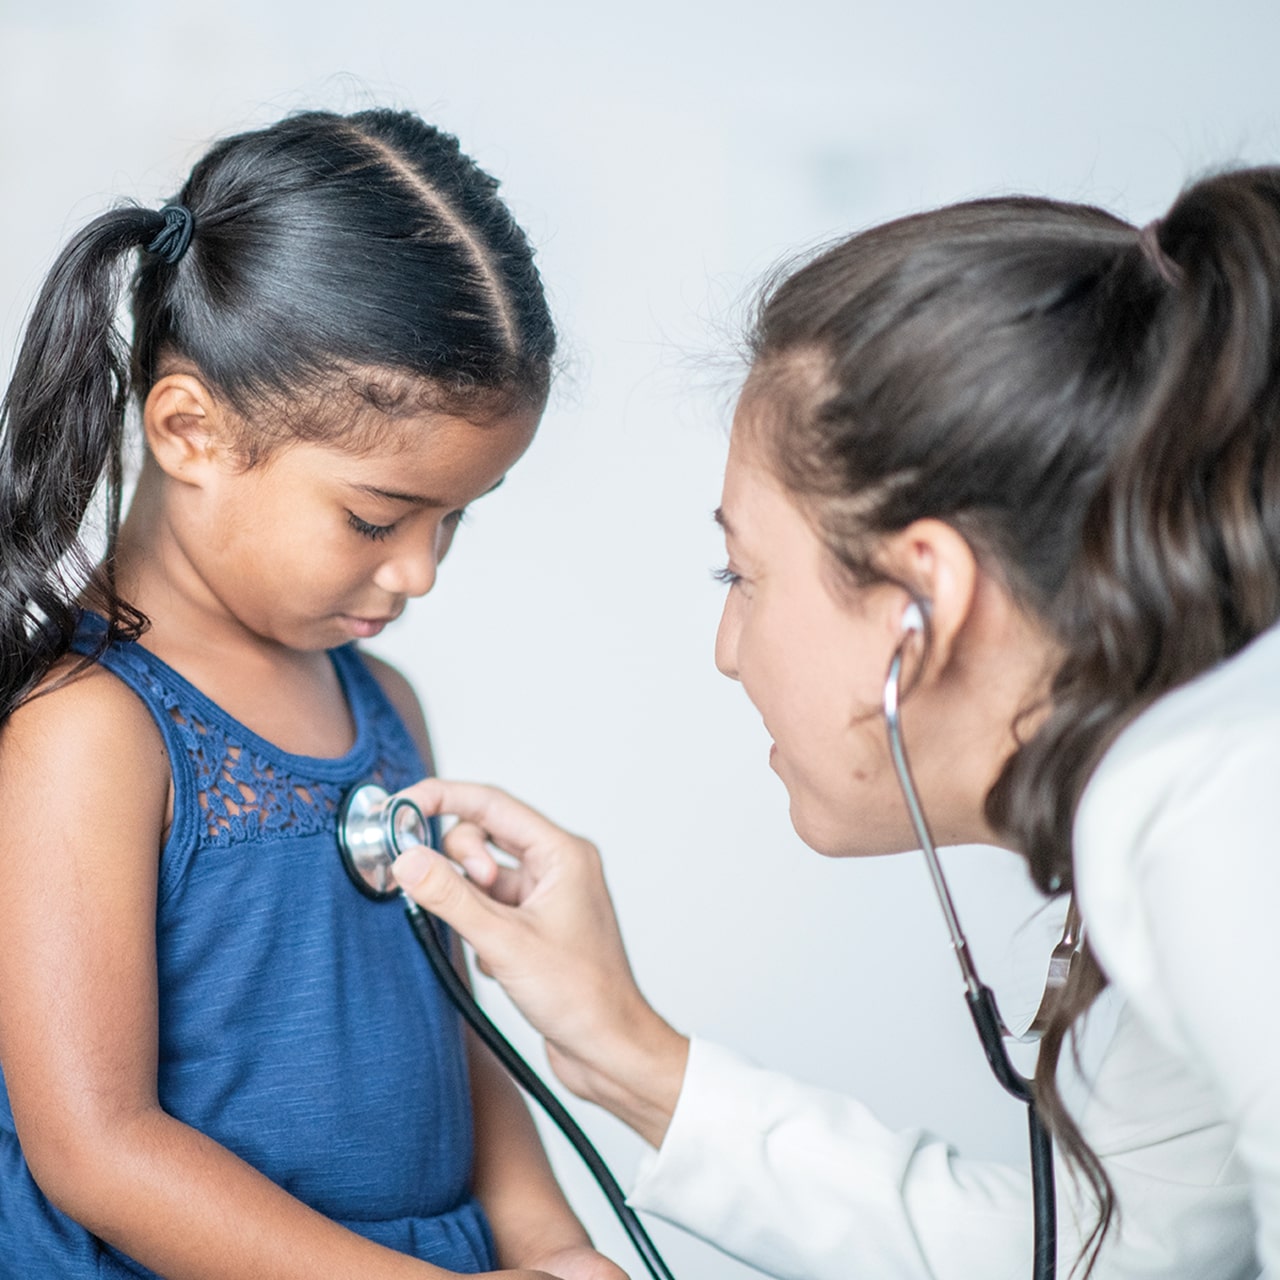 Young girl gets a checkup from the doctor.